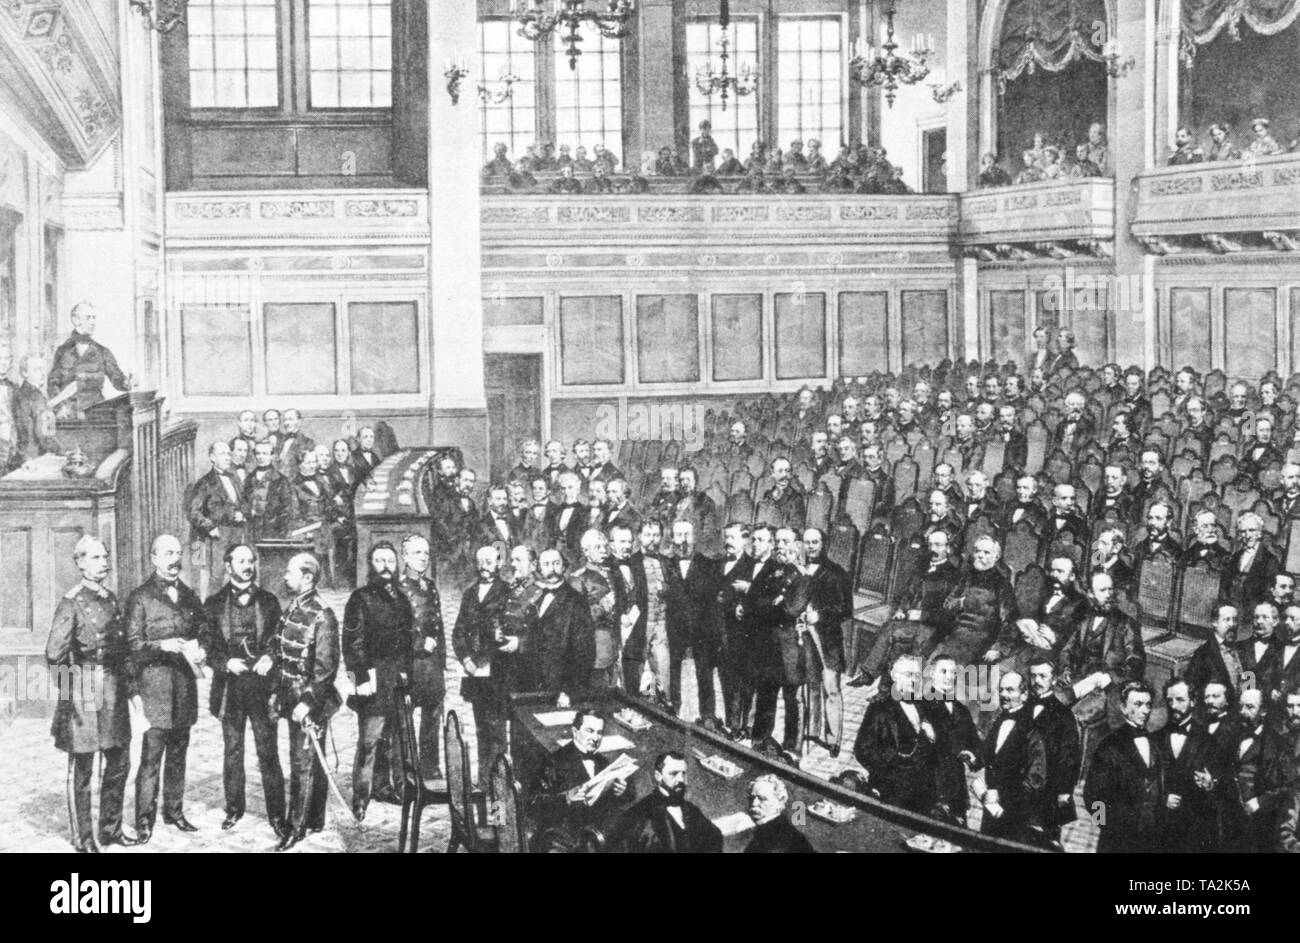 The Reichstag was composed of 397 deputies who come from universal, equal, direct and secret elections. The drawing shows the meeting, which was attended among others by the Minister of War, Albrecht von Roon (far left below), the Prussian Prime Minister, Otto von Bismarck (right beside), and the Prussian Chief of General Staff Helmut von Moltke (6th from left). Undated picture. Stock Photo